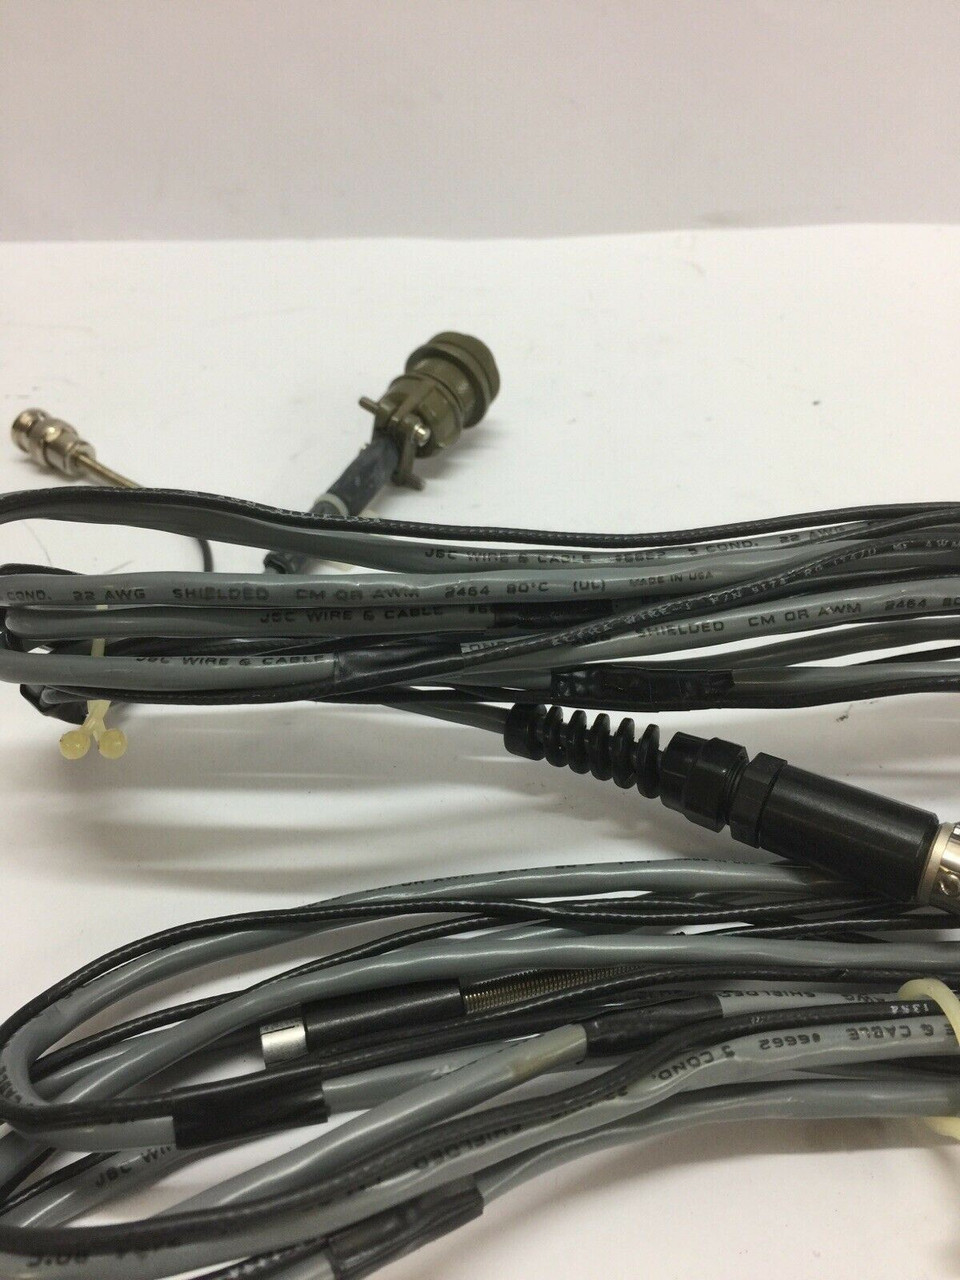 Cable Assembly HTC-2-15 JSC Wire & Cable